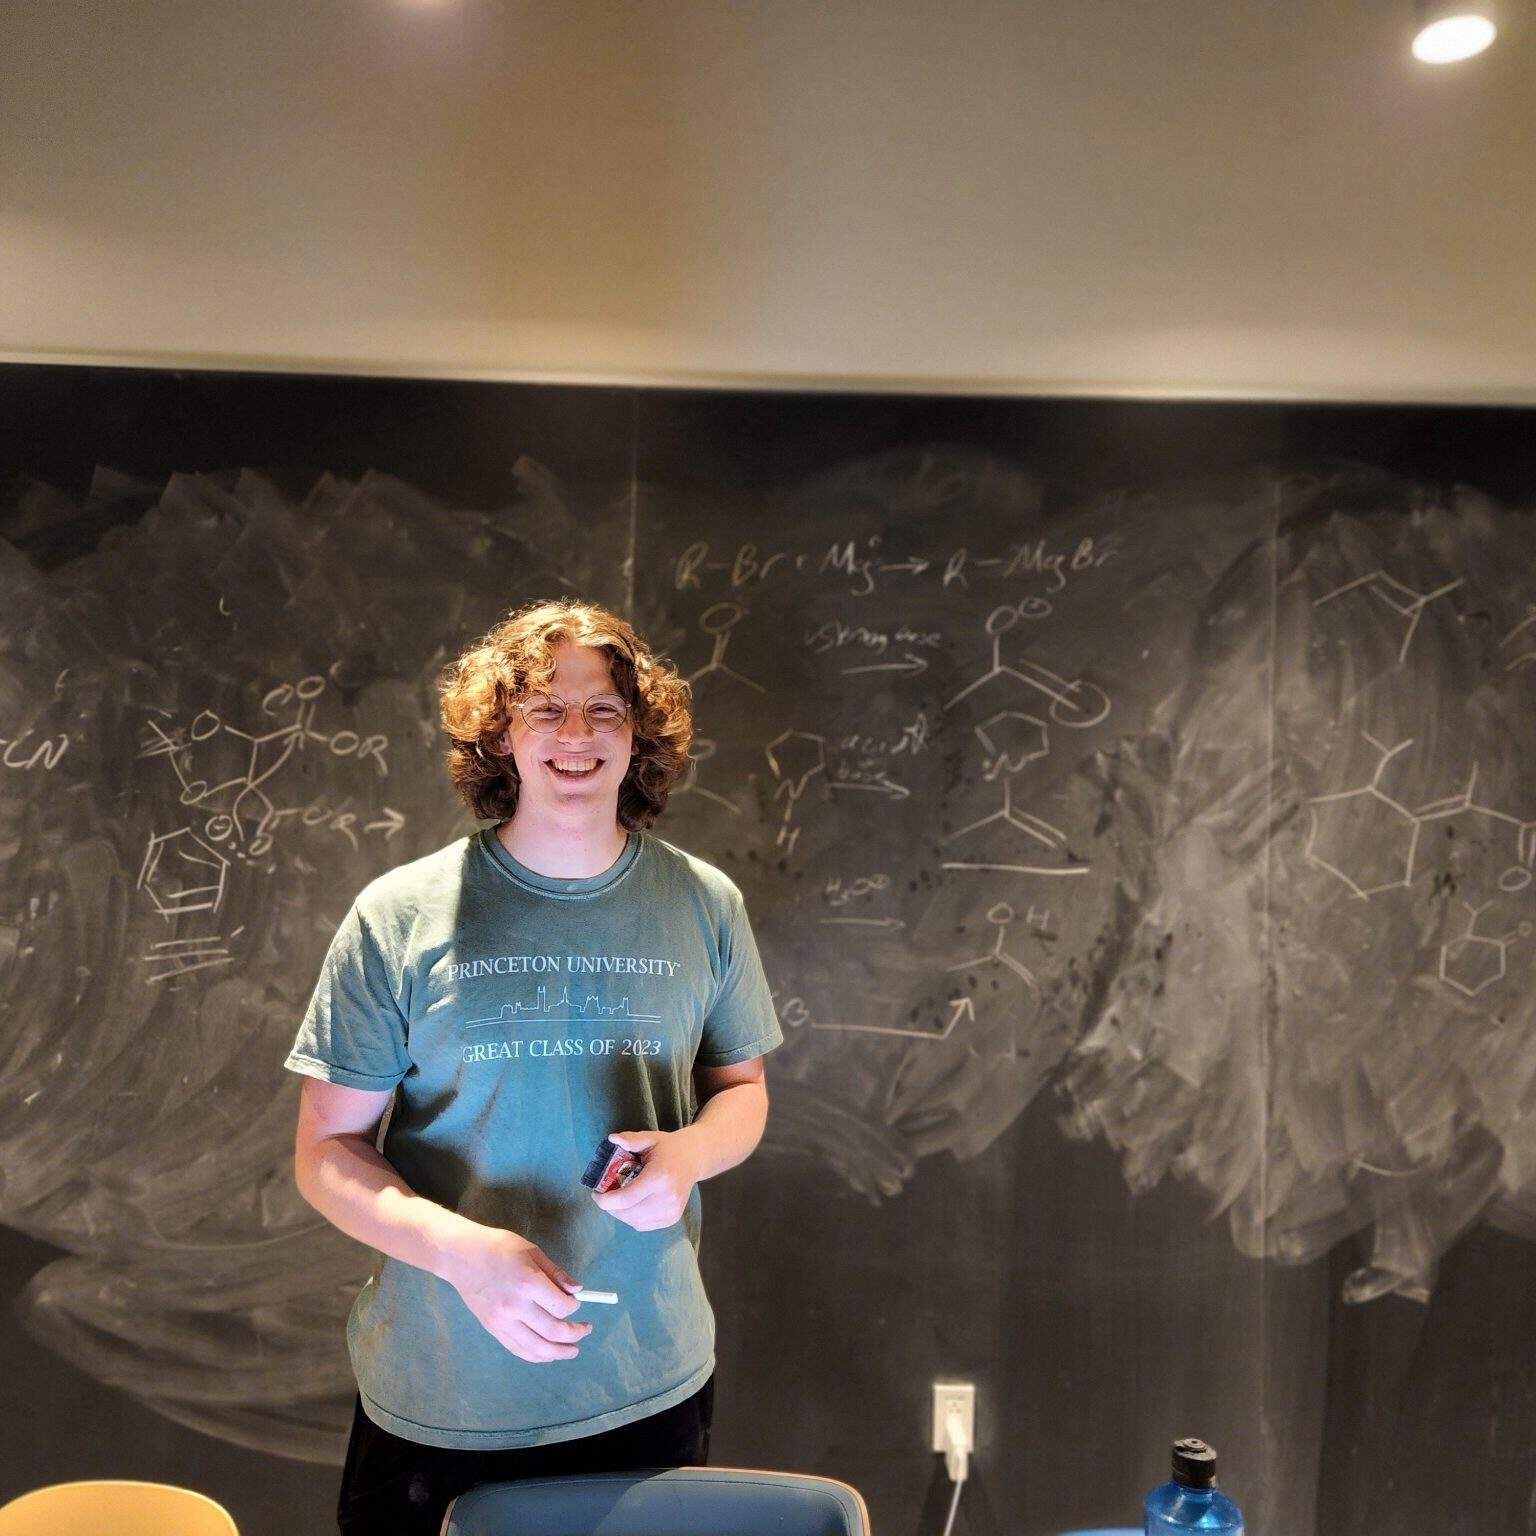 Organic Chemistry TA and Princeton Senior Tom Silldorff poses in front of a chalkboard after a long night of tutoring at the NCW dining hall.